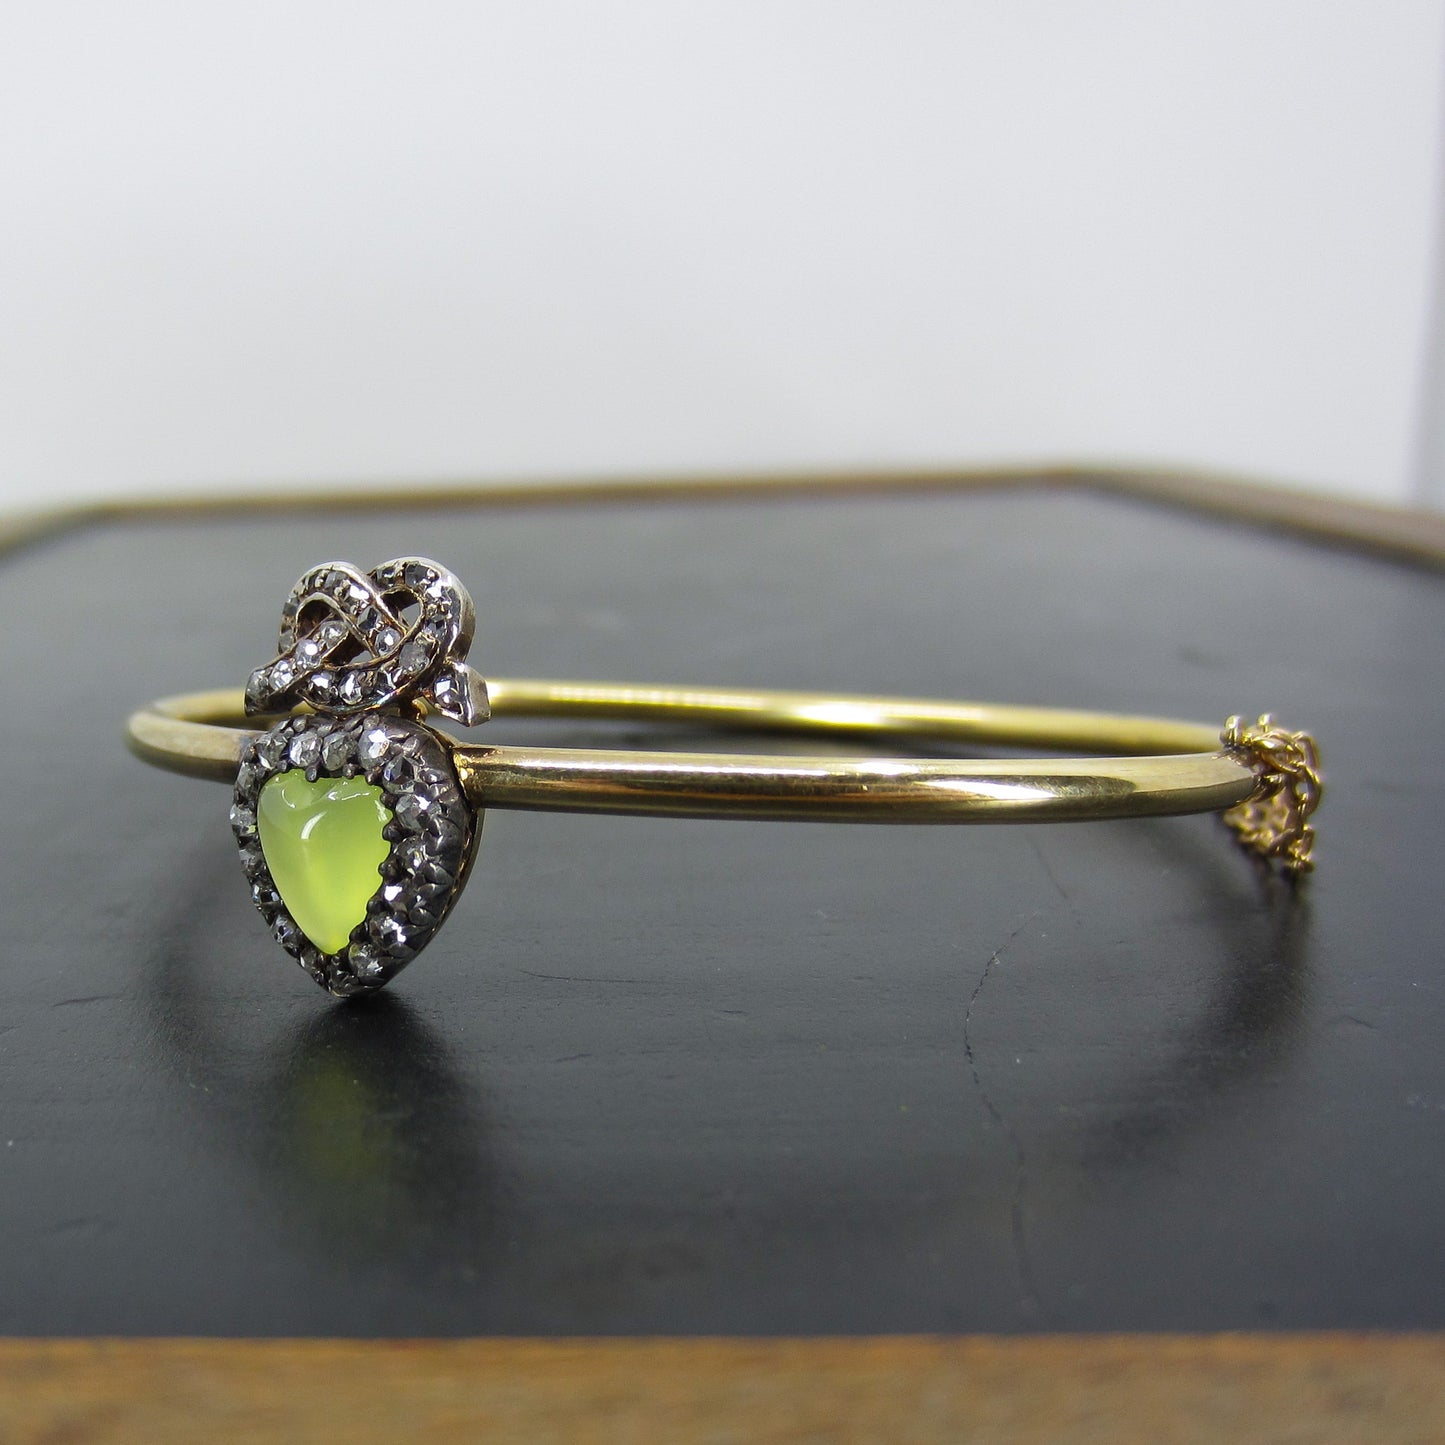 SOLD--Victorian Chrysoprase and Rose Cut Diamond Heart with Love Knot Bracelet Silver/14k c. 1890